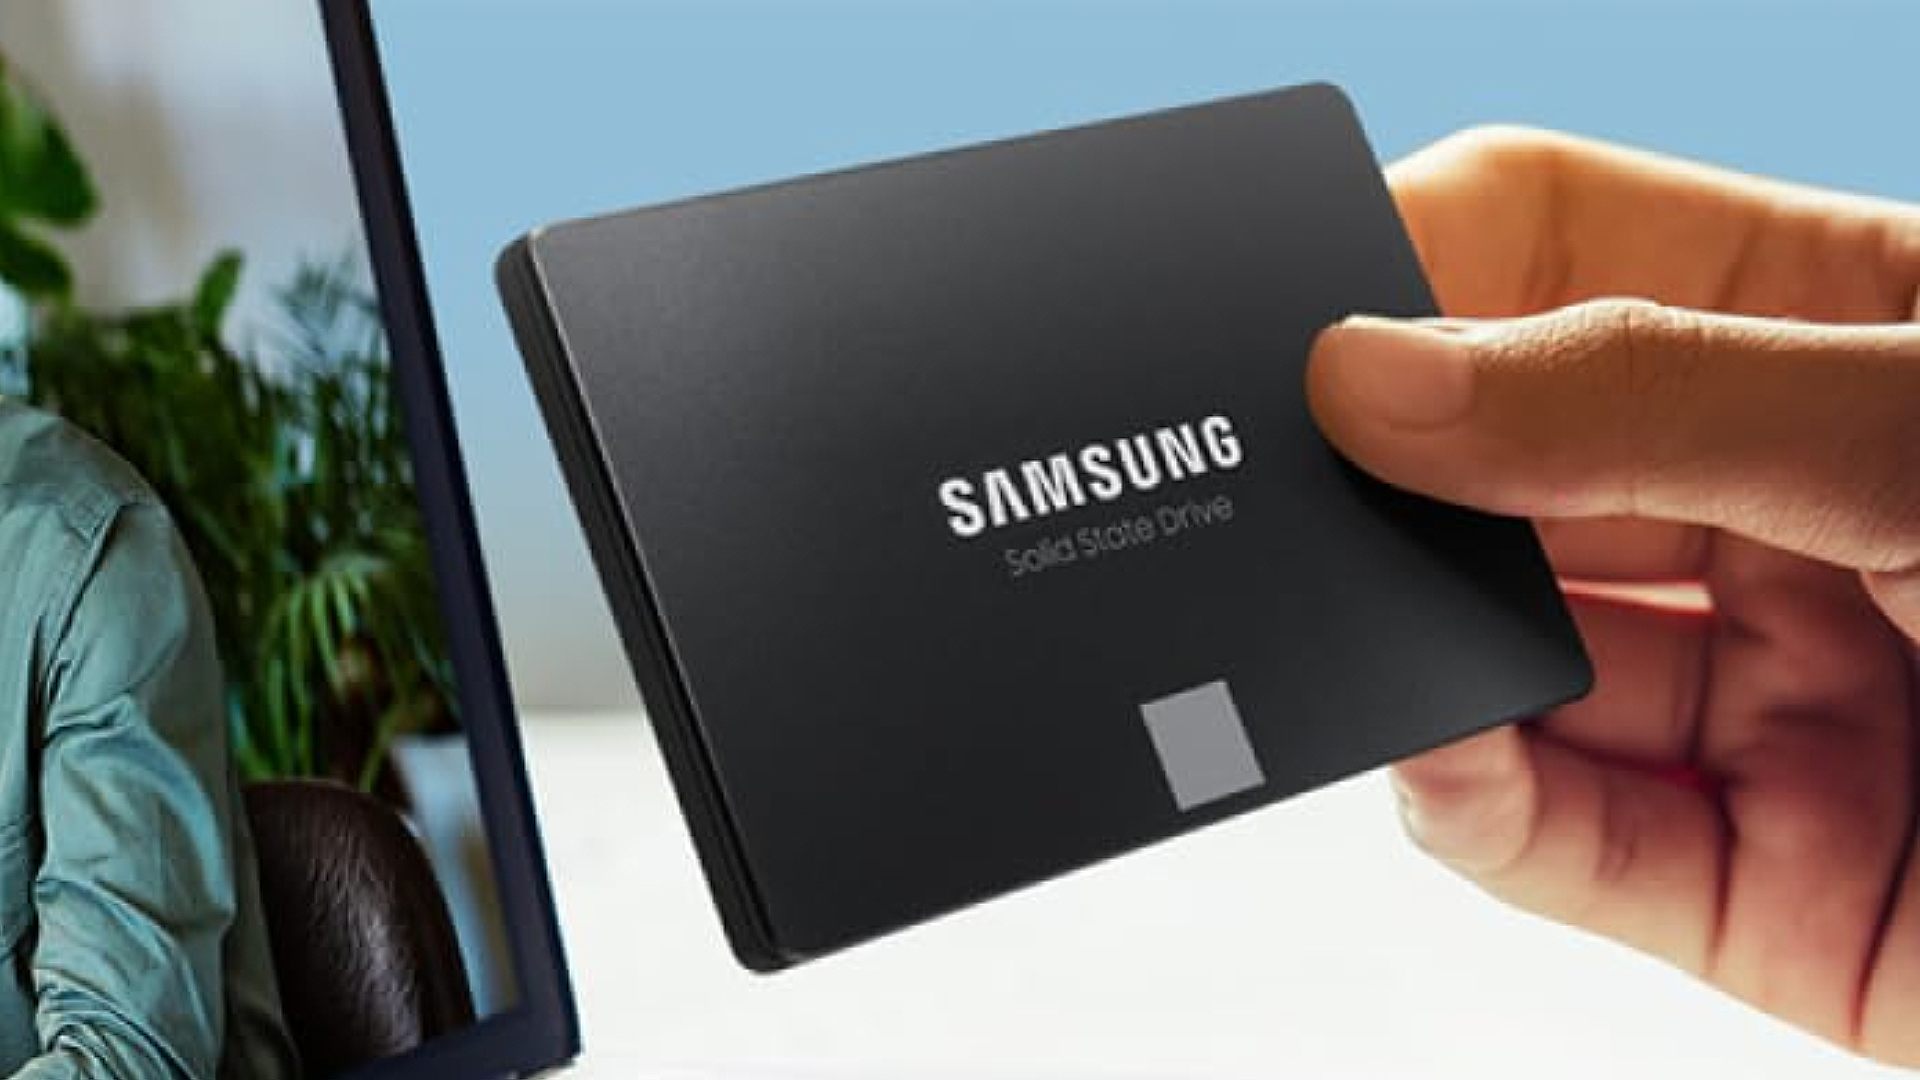 Snag this Samsung SSD for less and ditch your old hard drive